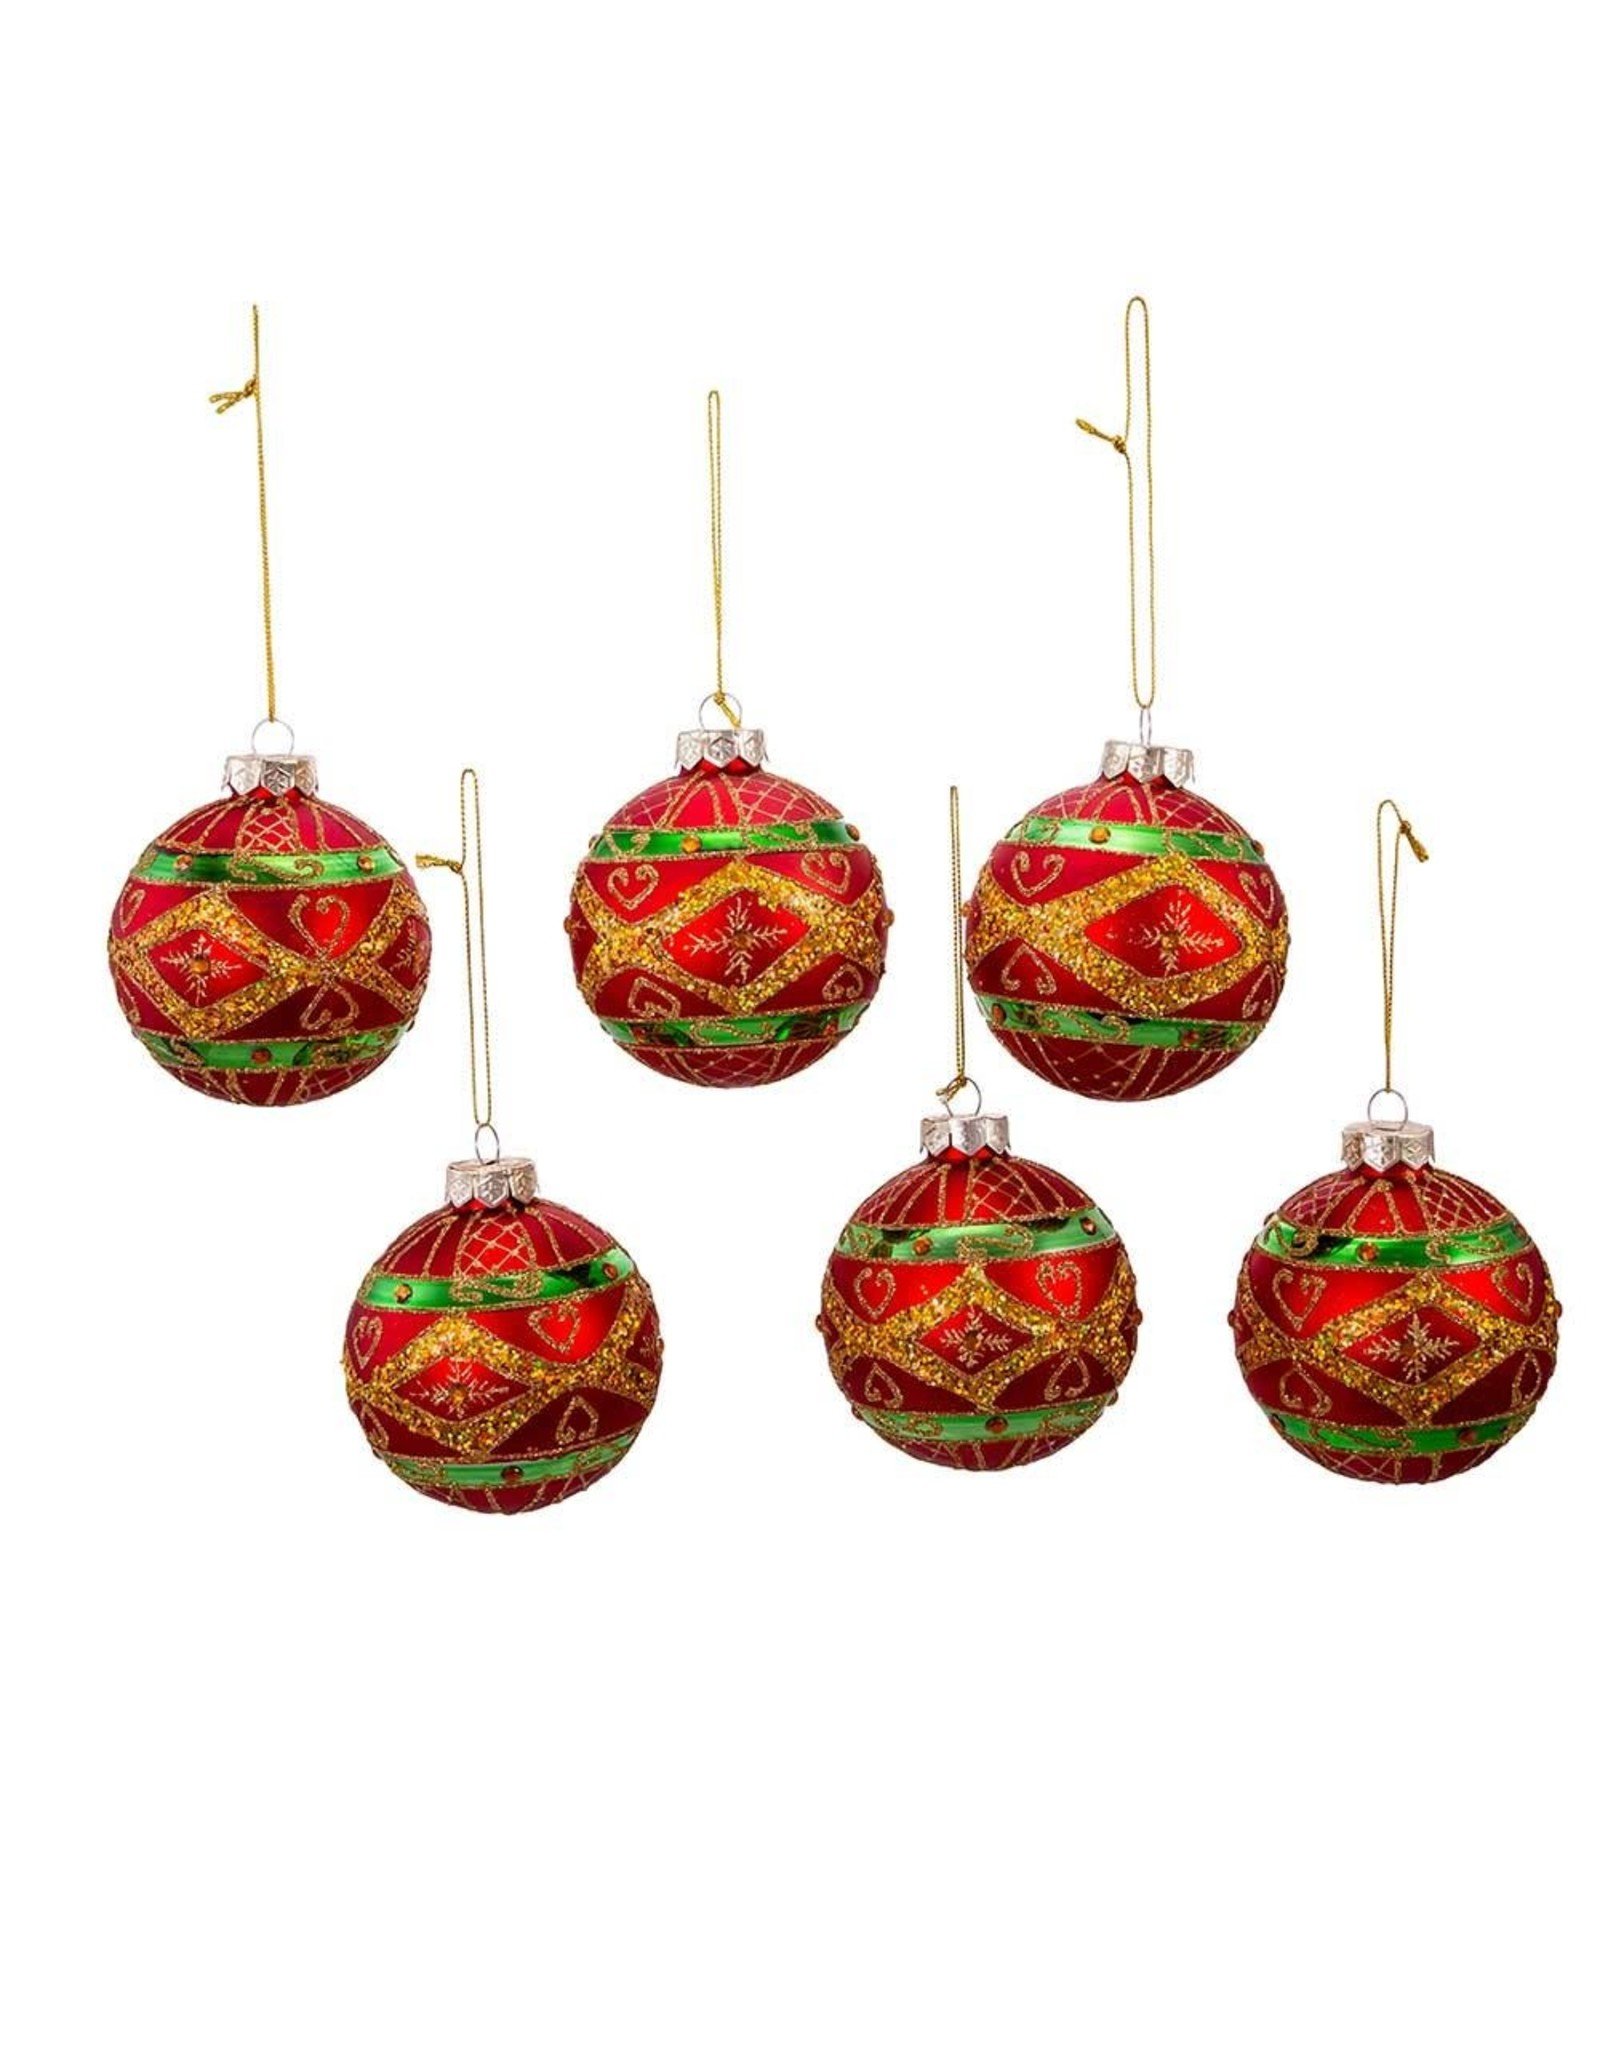 Red Green Gold Glass Ball Ornaments Set of 6 - Digs N Gifts